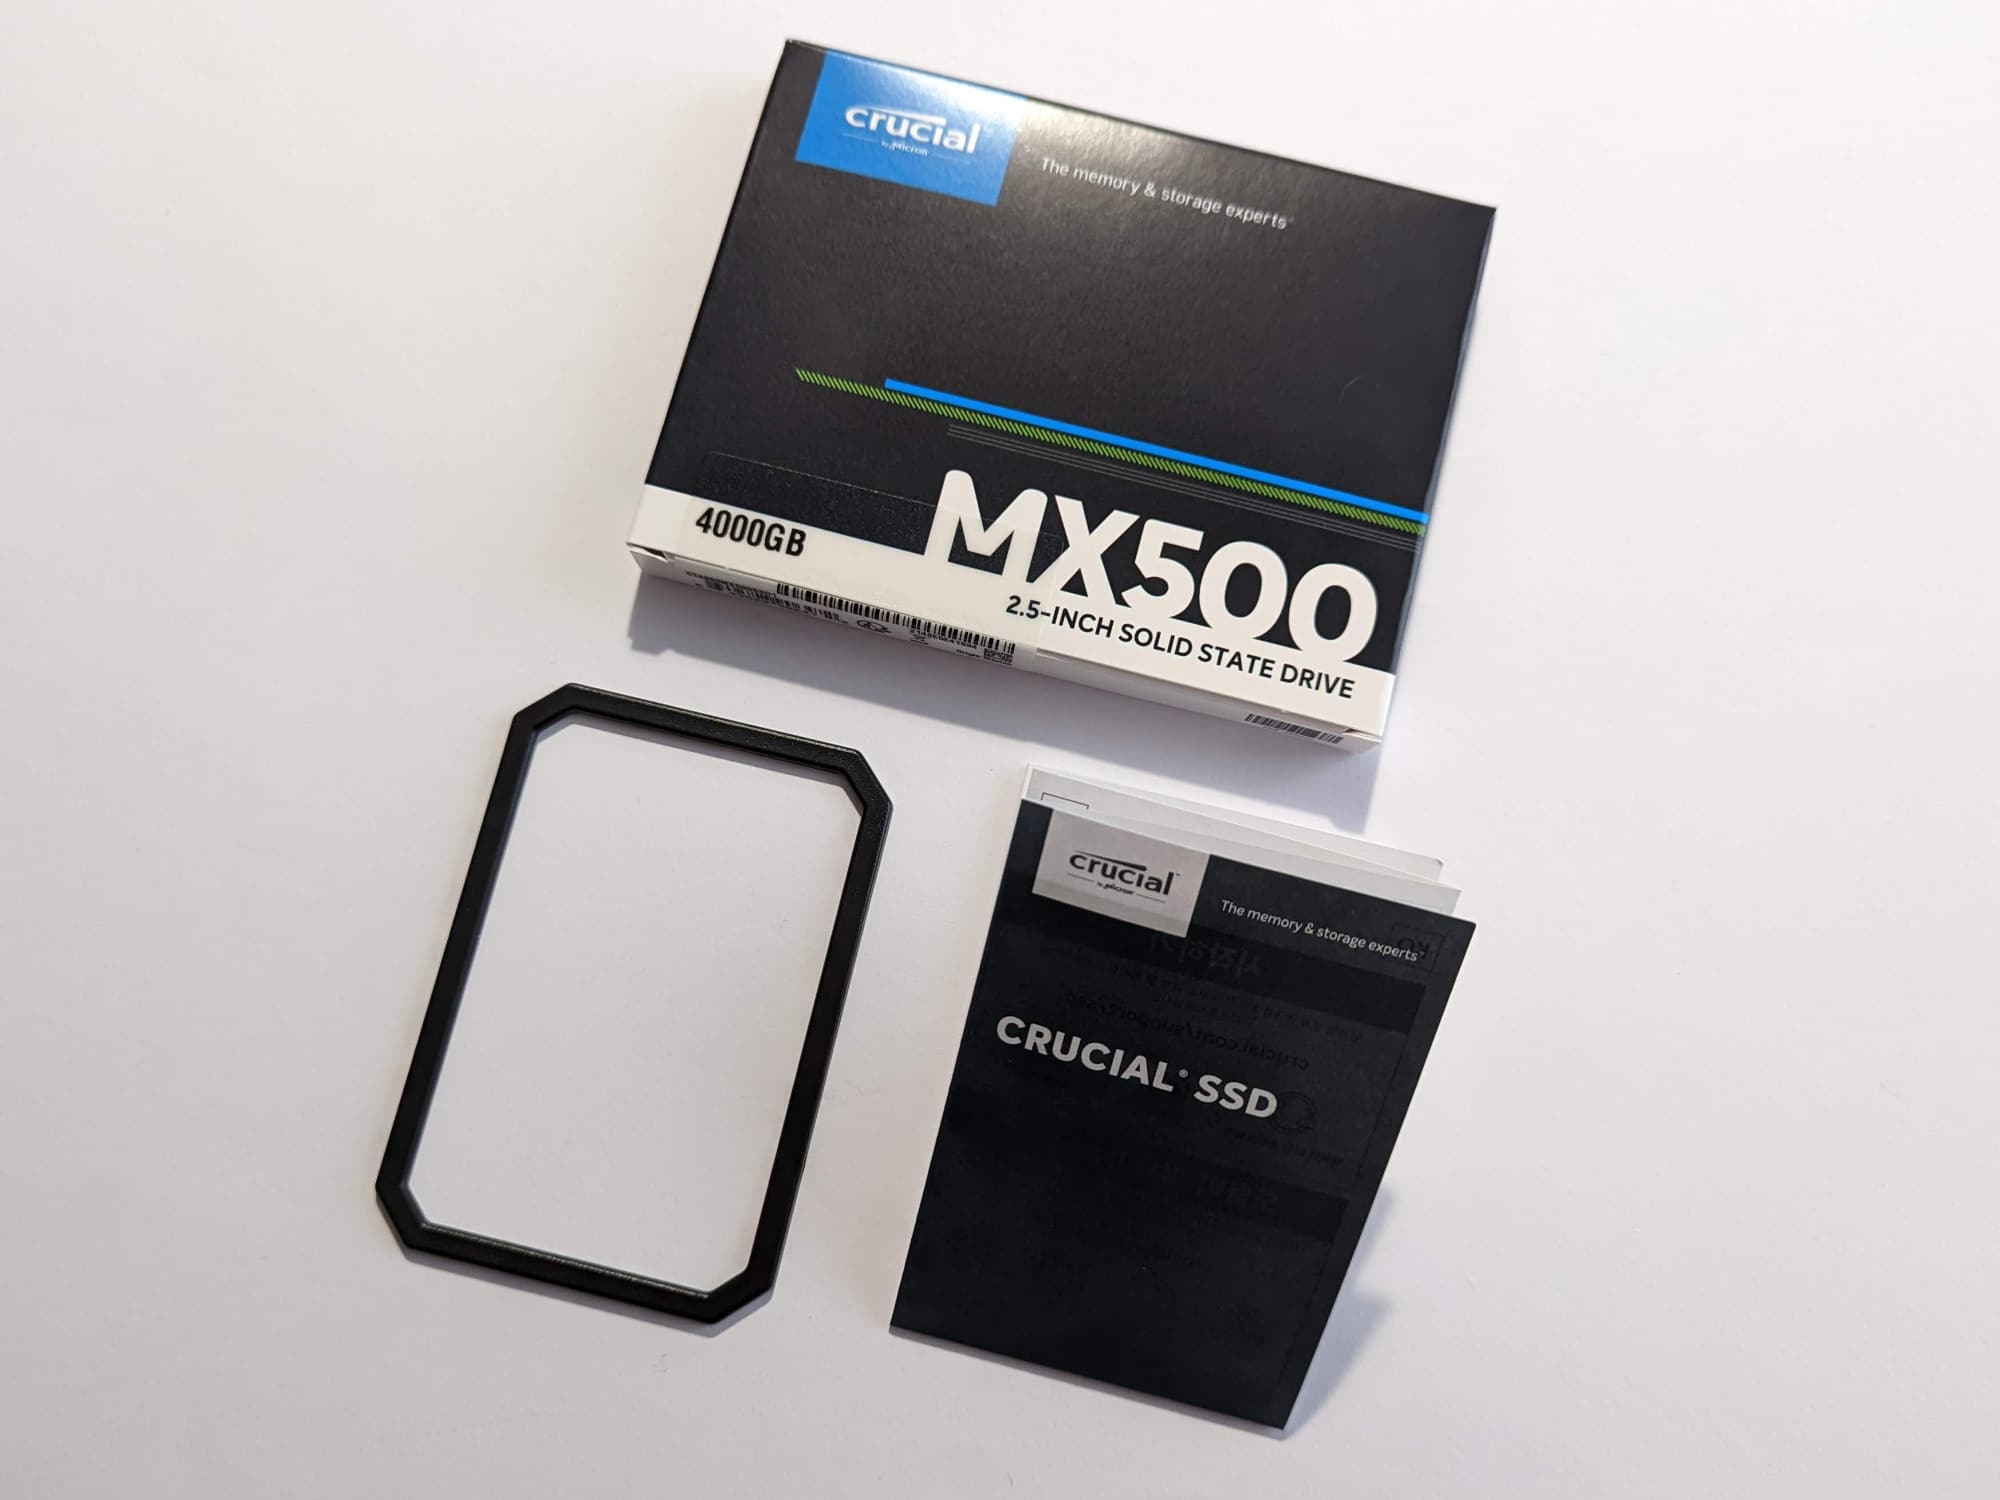 with 4 TB capacity test - SATA MX500 SSD Crucial storage in